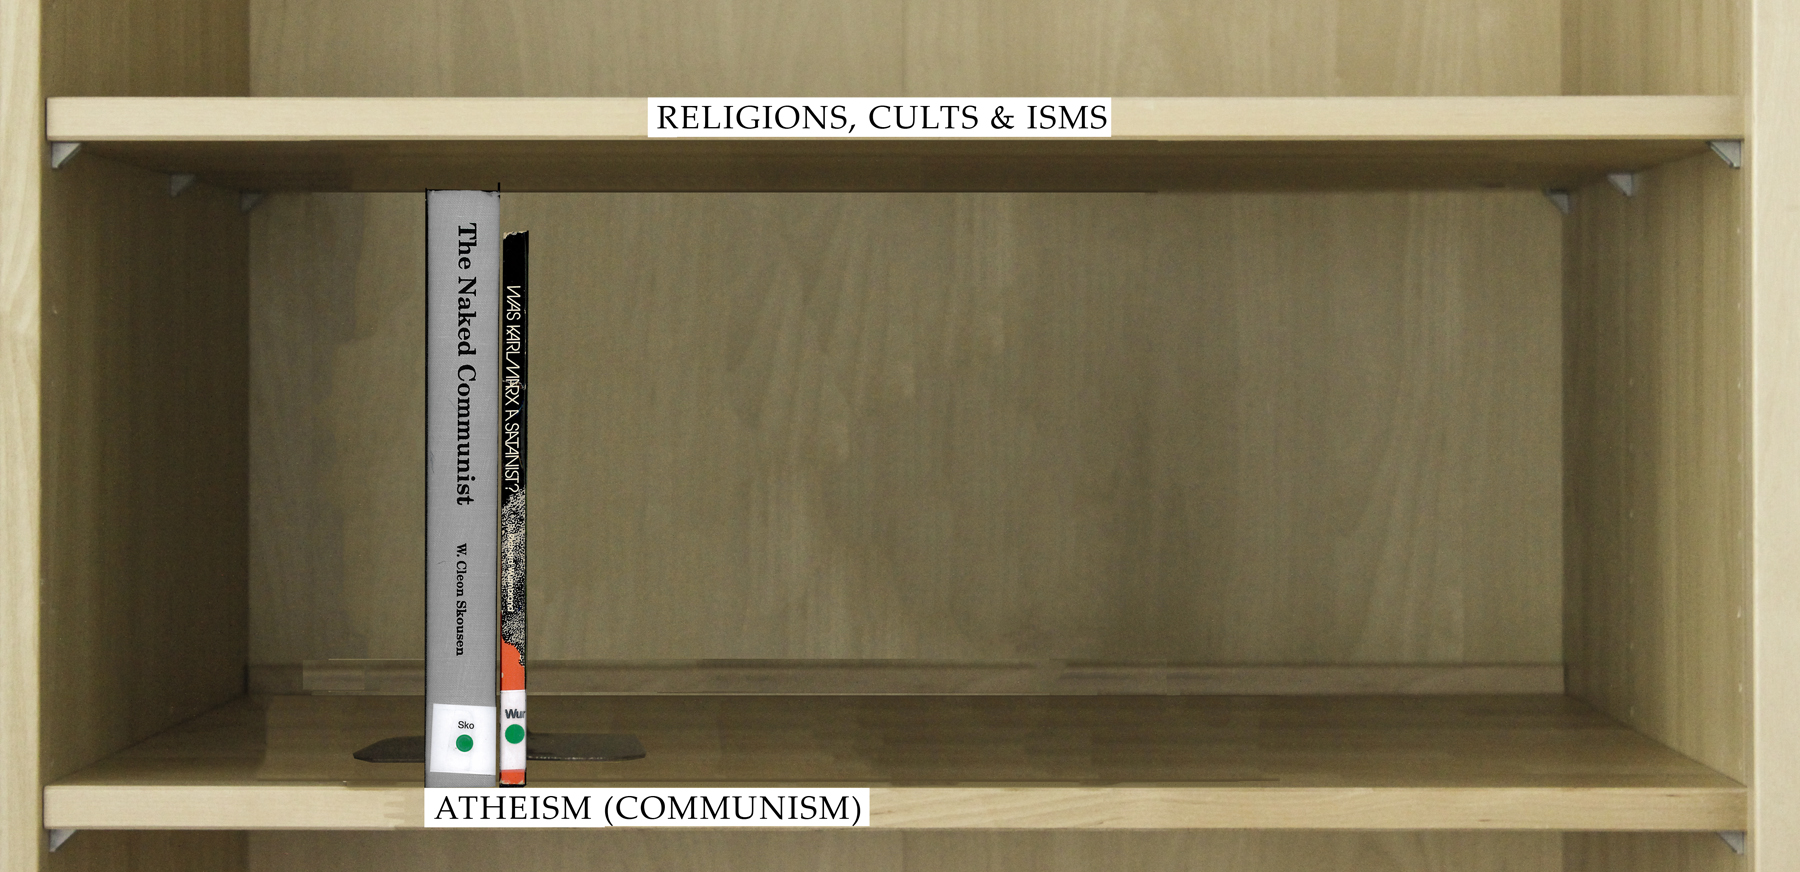 Index of Books Under the Category Atheism (Communism).